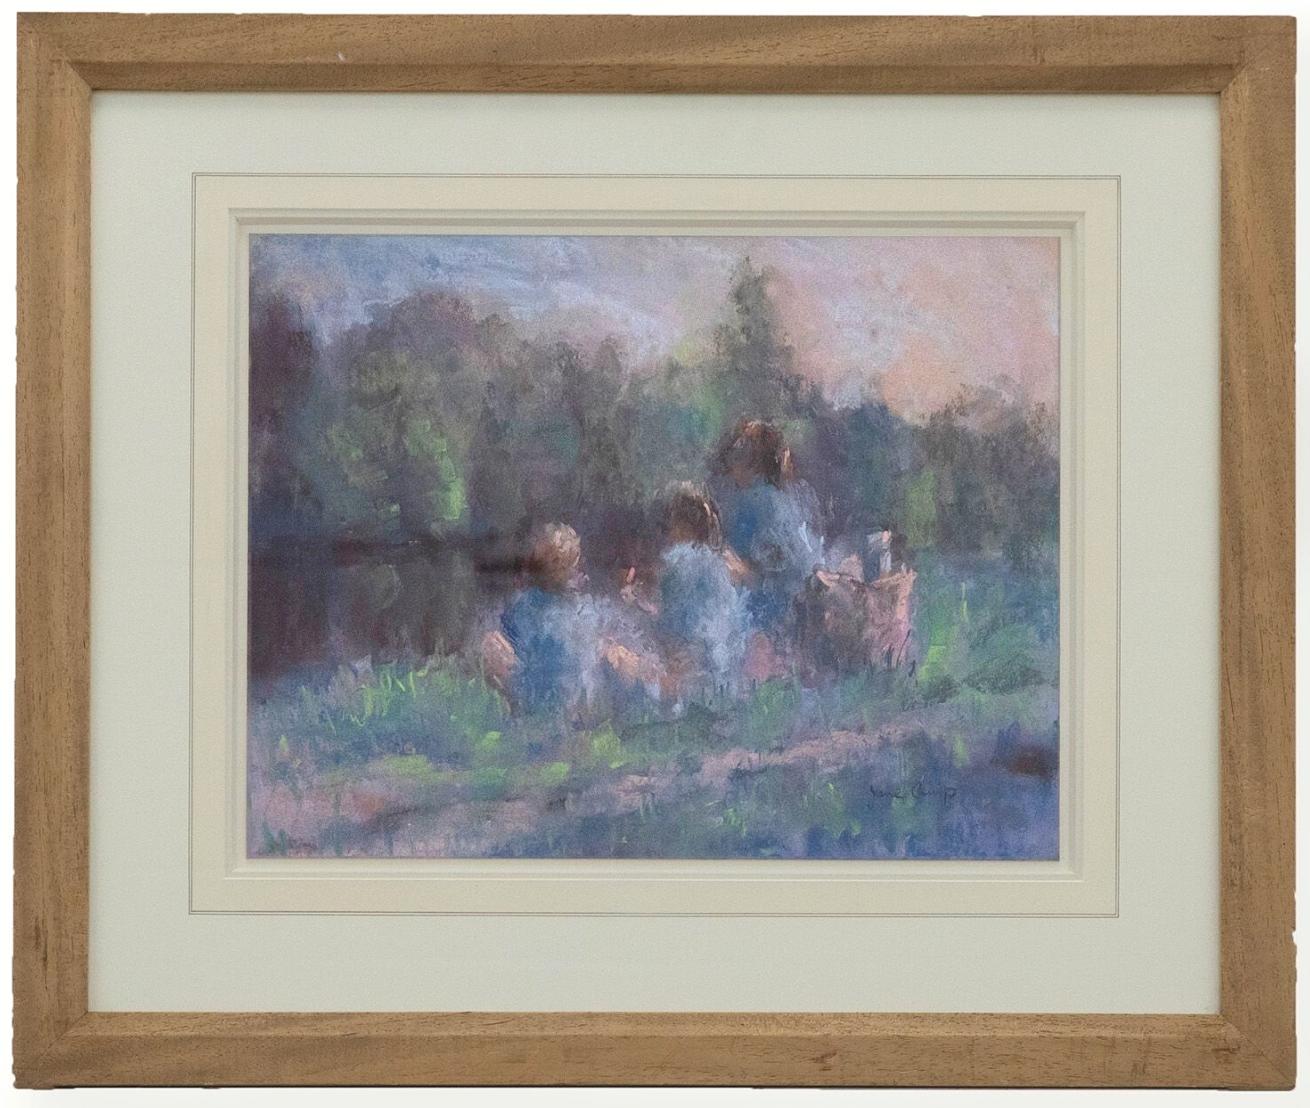 A charming pastel scene depicting three figures sat on a river verge of a river bank at sunset. The sunset in the distance casts a warm glow over the scene. Captured in a loose impressionist style. Signed to the lower right. Presented in a wooden